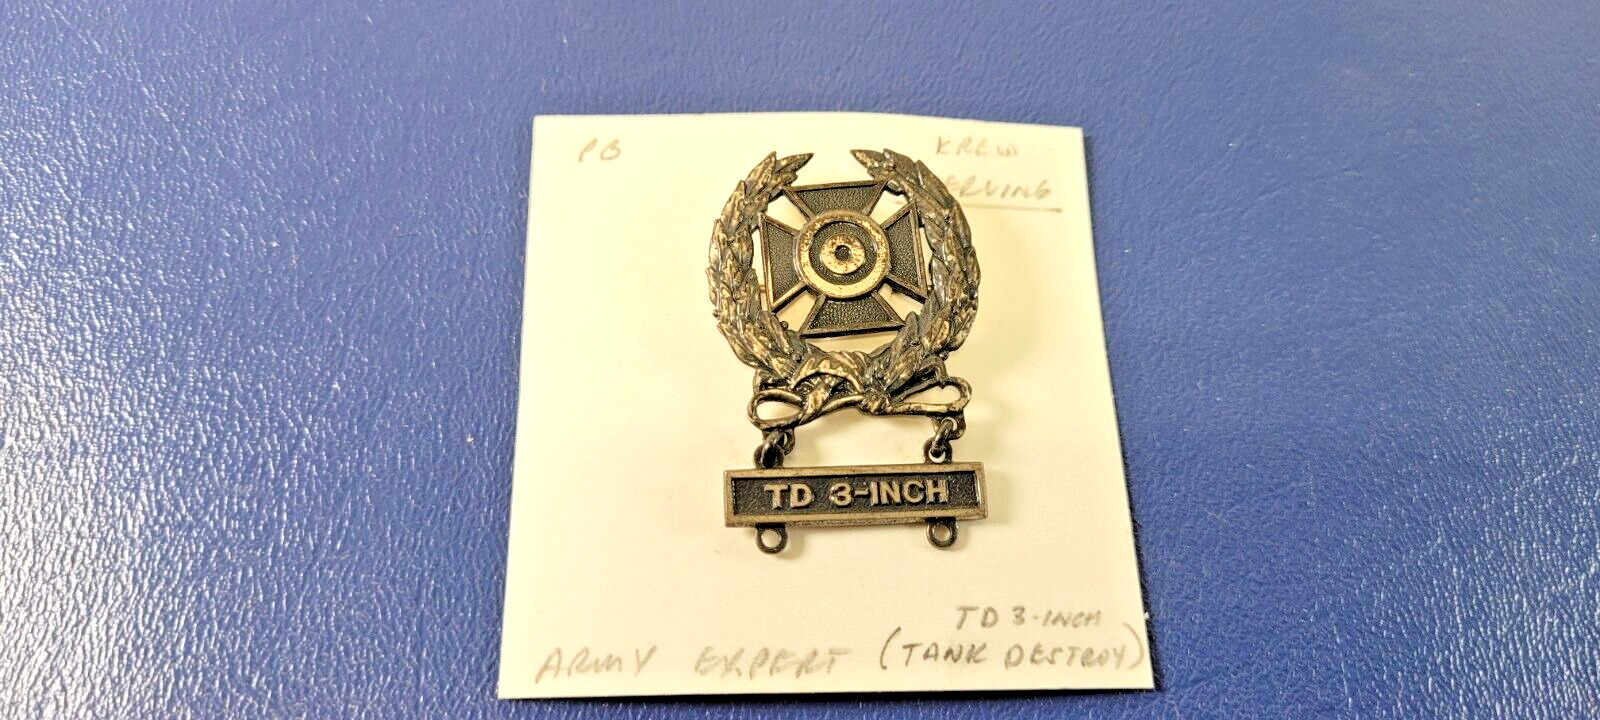 WWII US Army Expert TD 3-Inch Tank Destroy Krew Sterling Silver Pin Medal